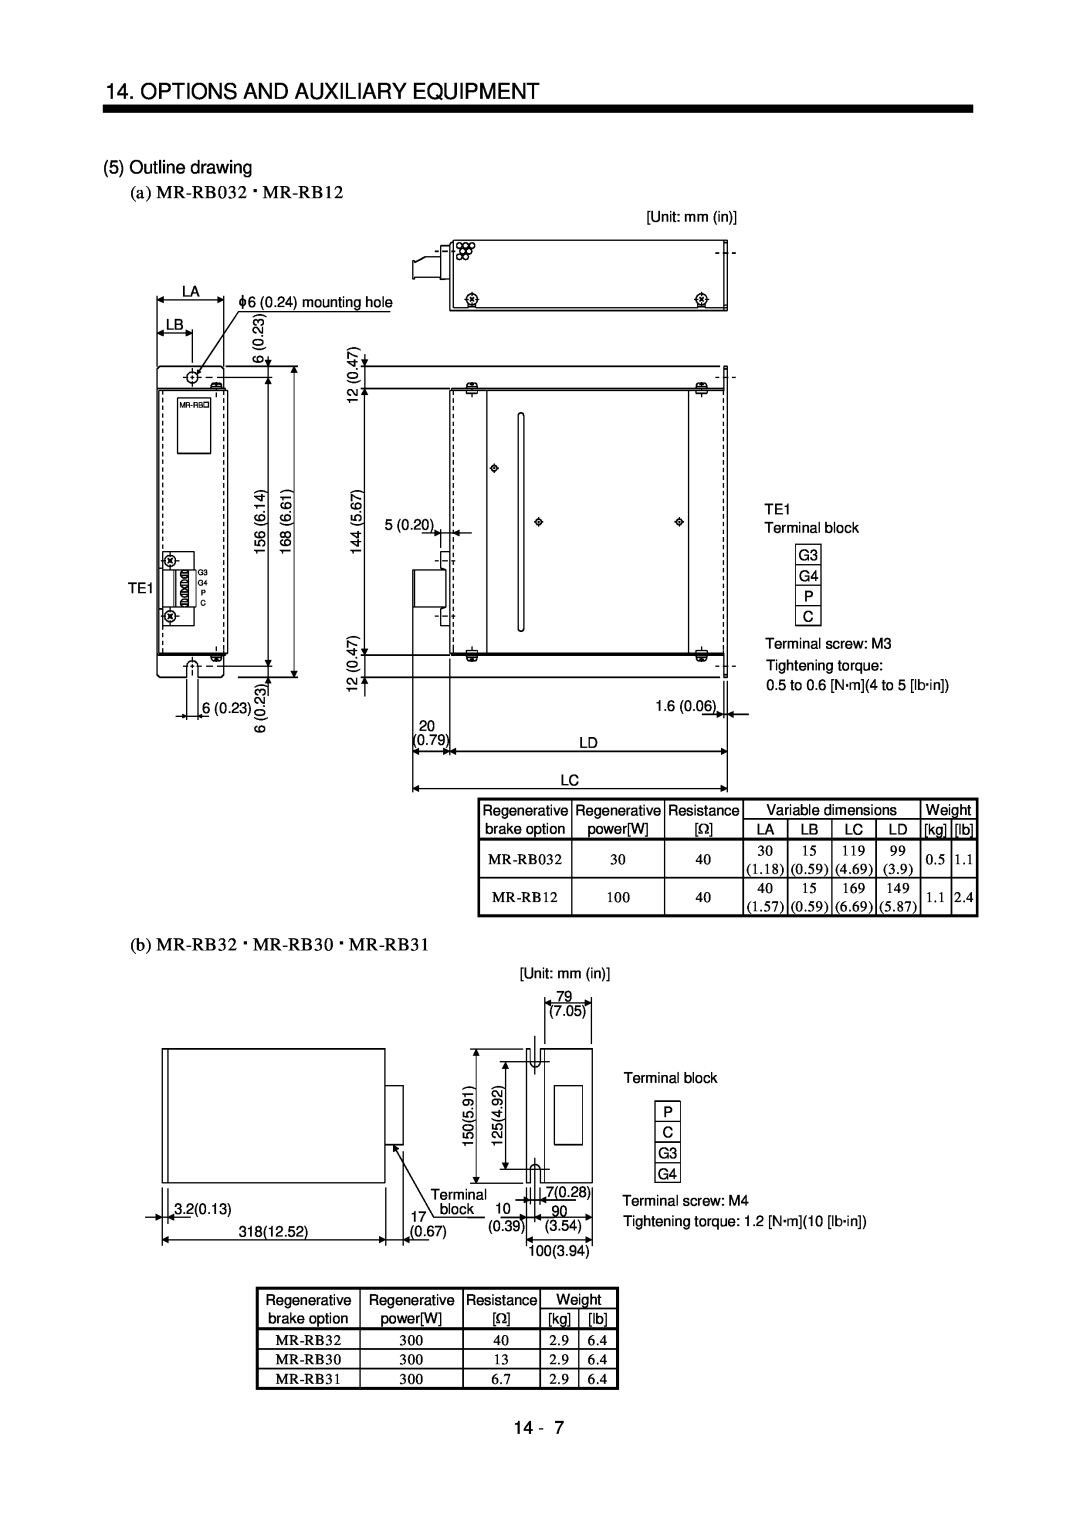 Mitsubishi Electronics MR-J2S- CL specifications 5Outline drawing, Options And Auxiliary Equipment, a MR-RB032 MR-RB12, 14 